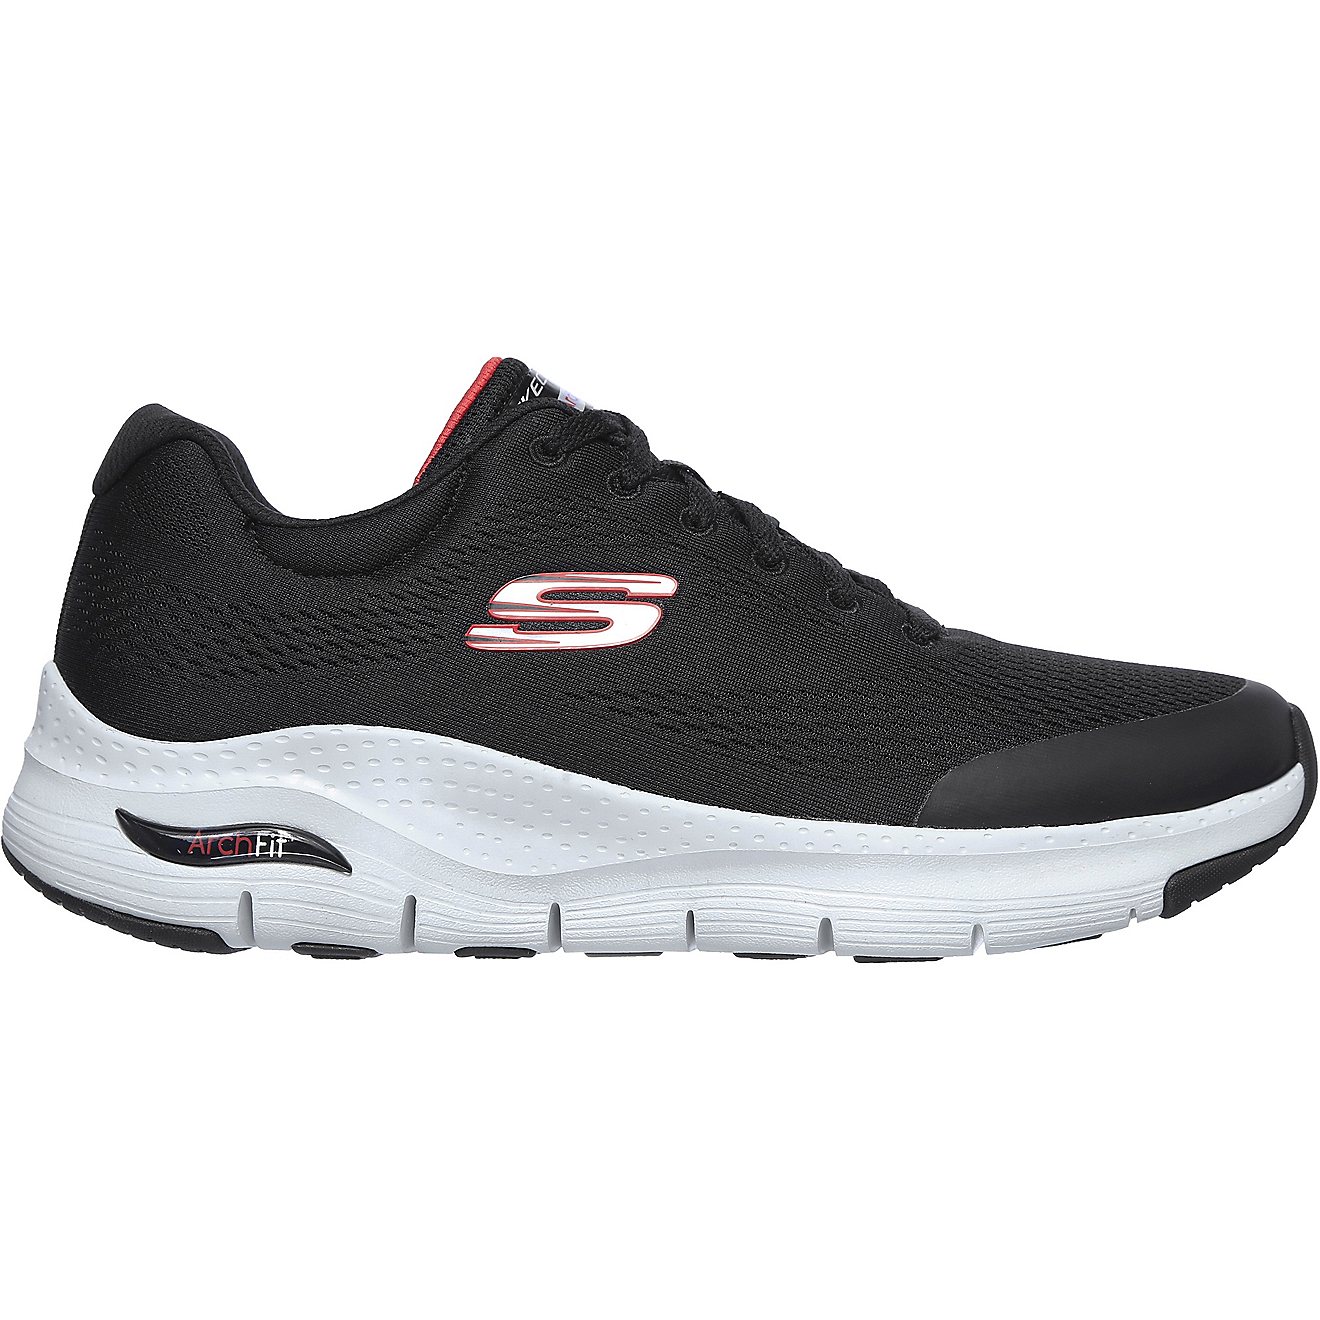 SKECHERS Men's Arch Fit Shoes | Free Shipping at Academy